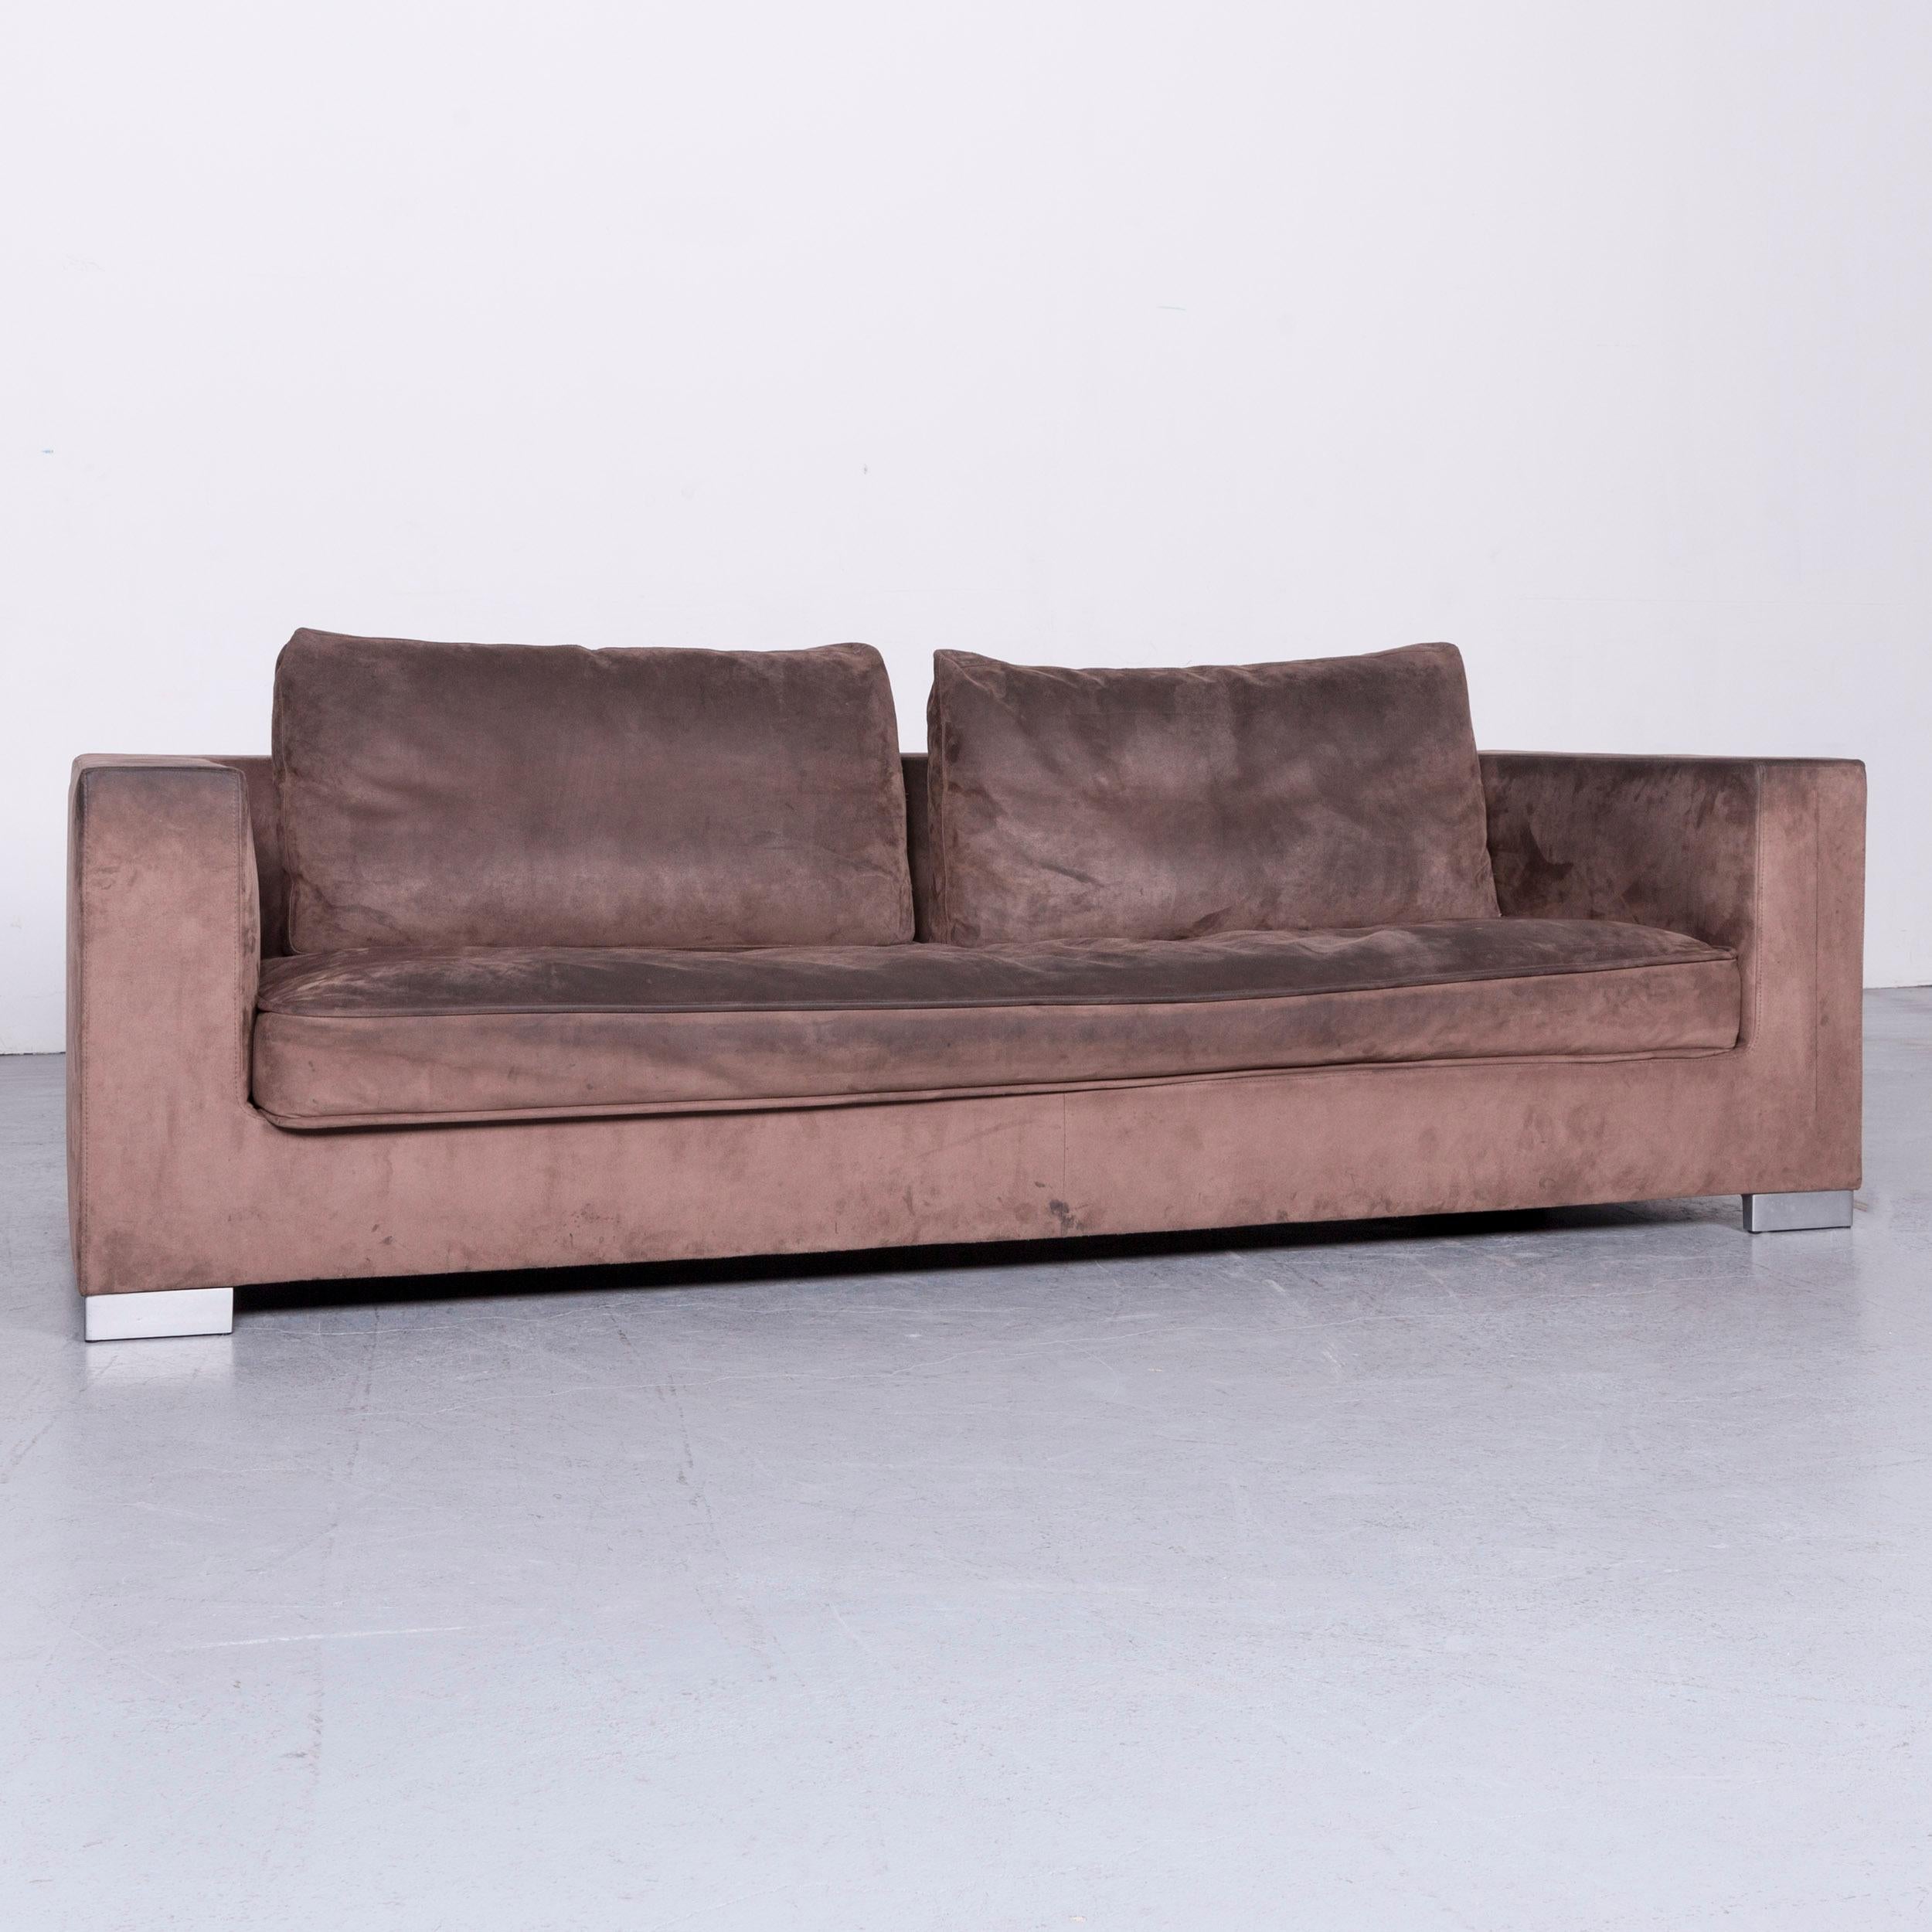 We bring to you a Ligne Roset Rive gauche designer fabric sofa brown two-seat couch.